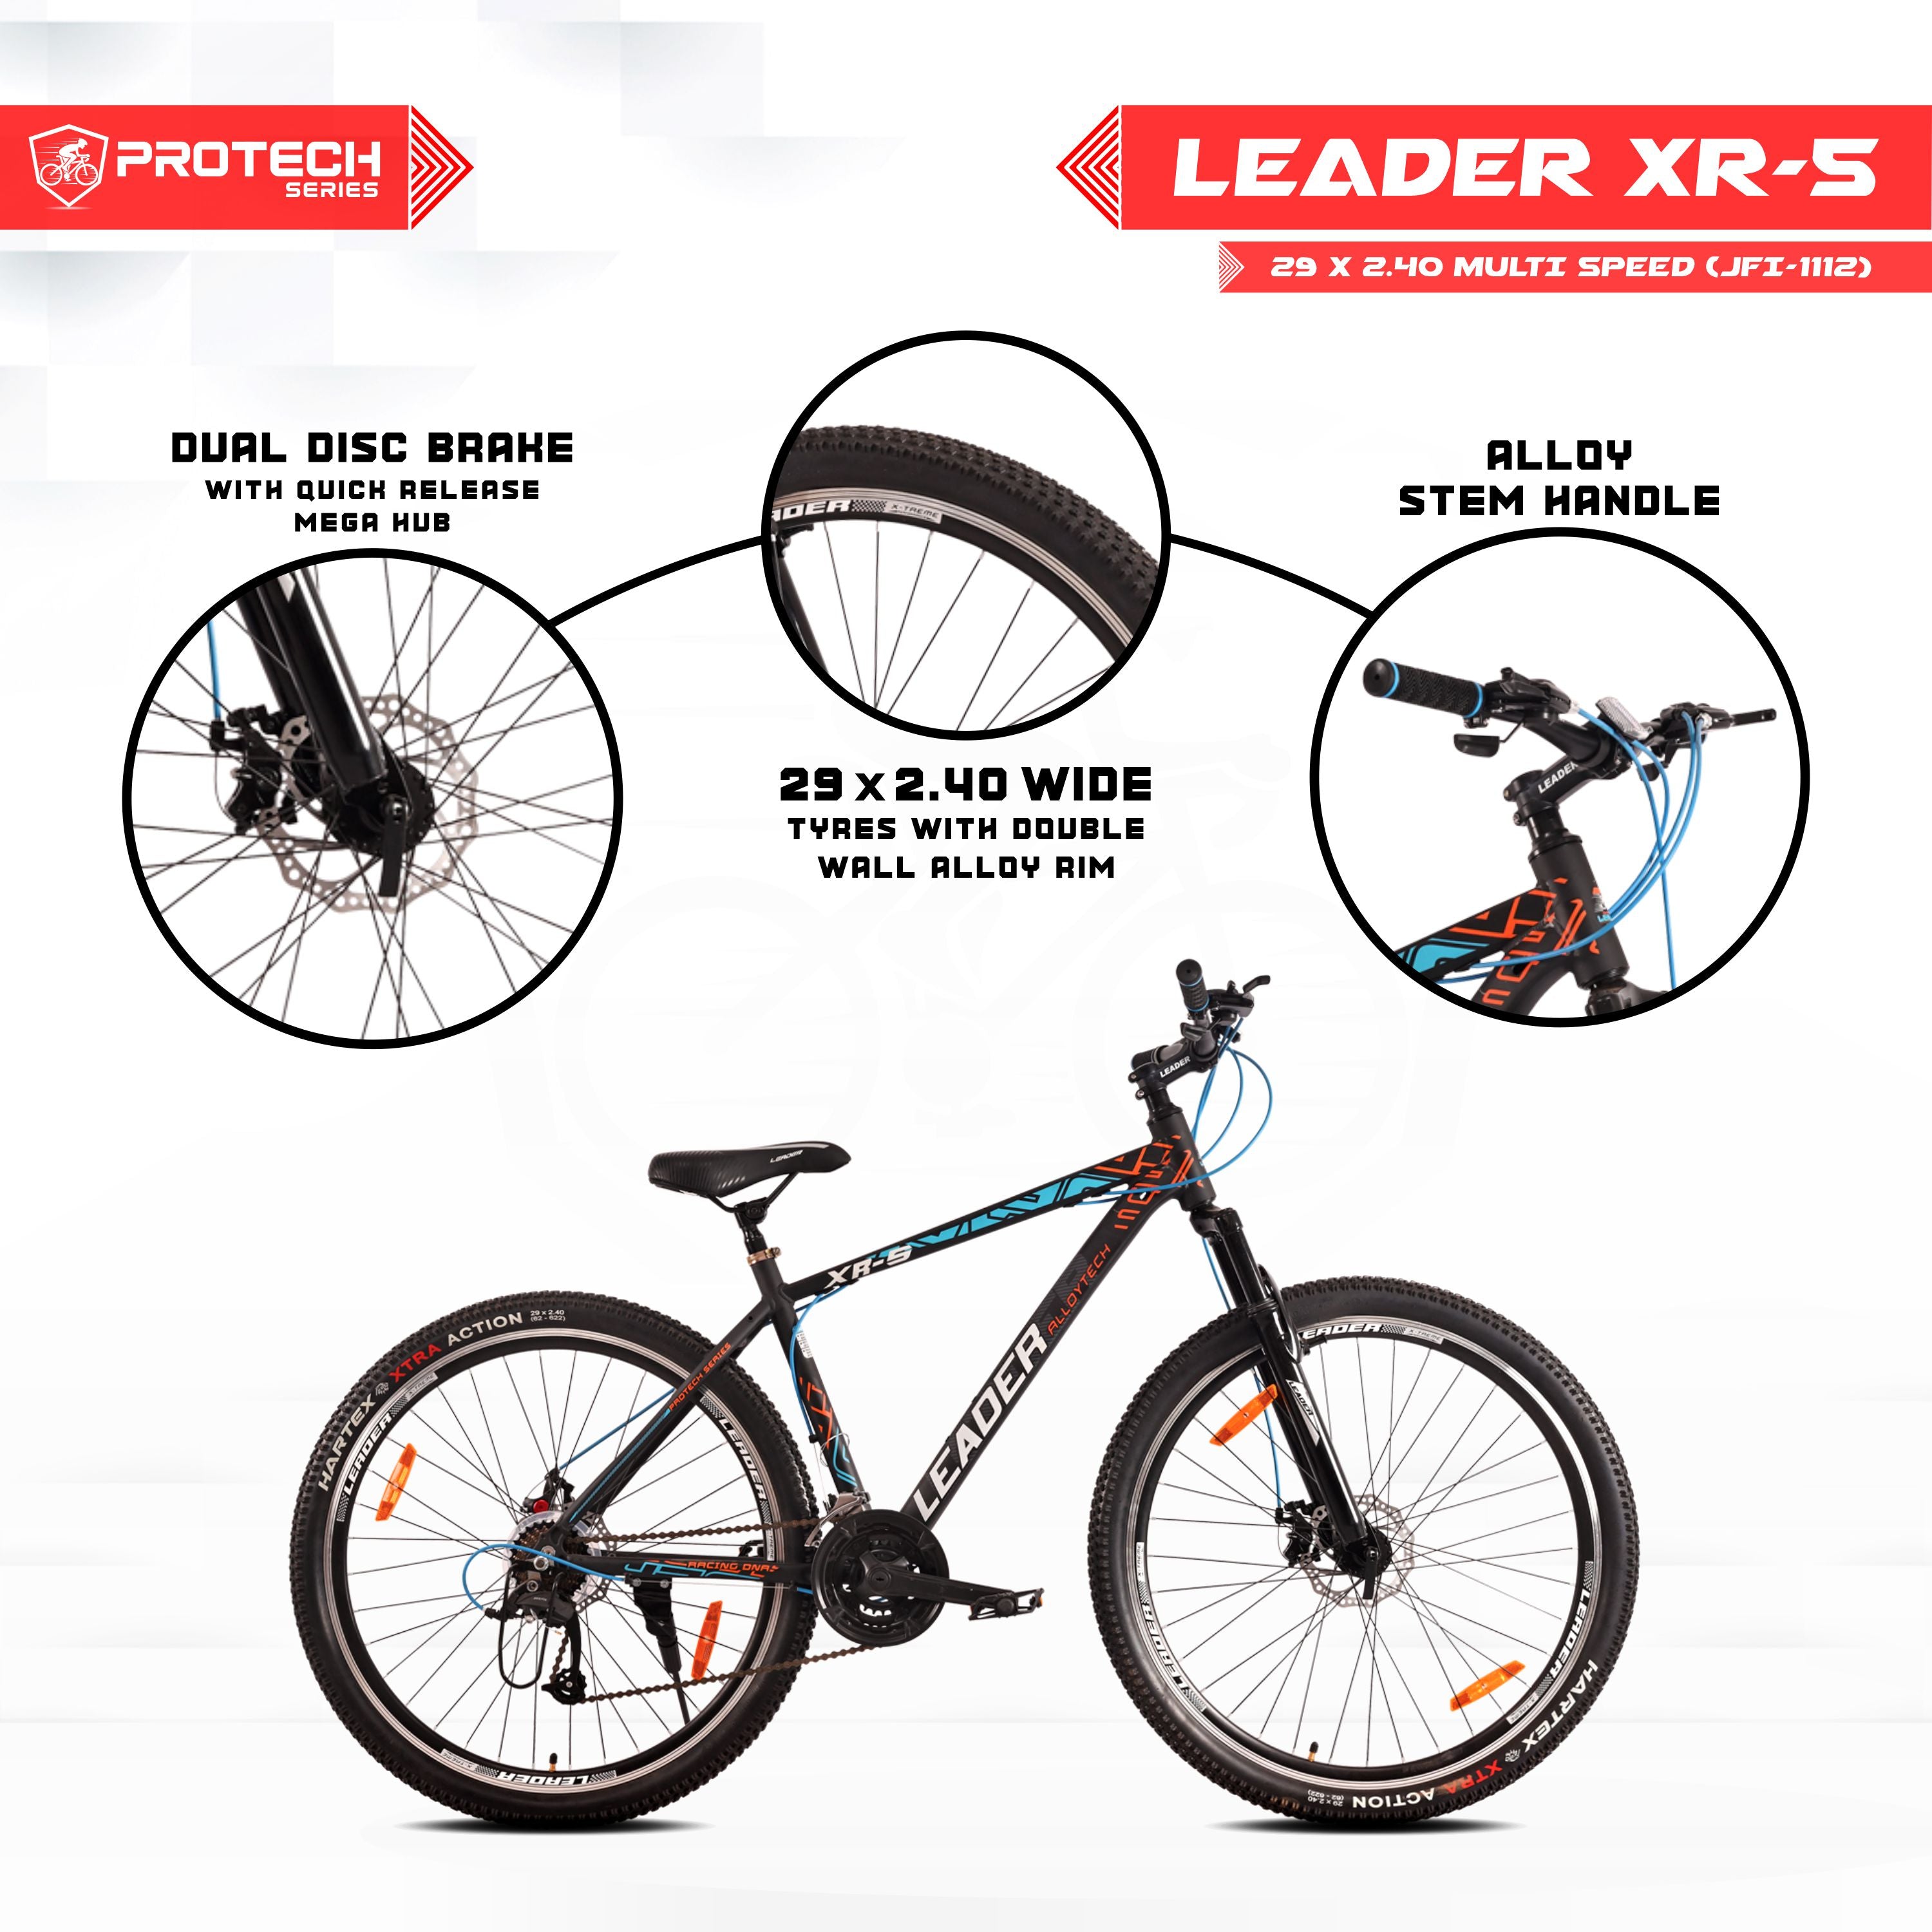 Leader XR-5 29T 21 Speed Alloy MTB cycle with Dual Disc Brake